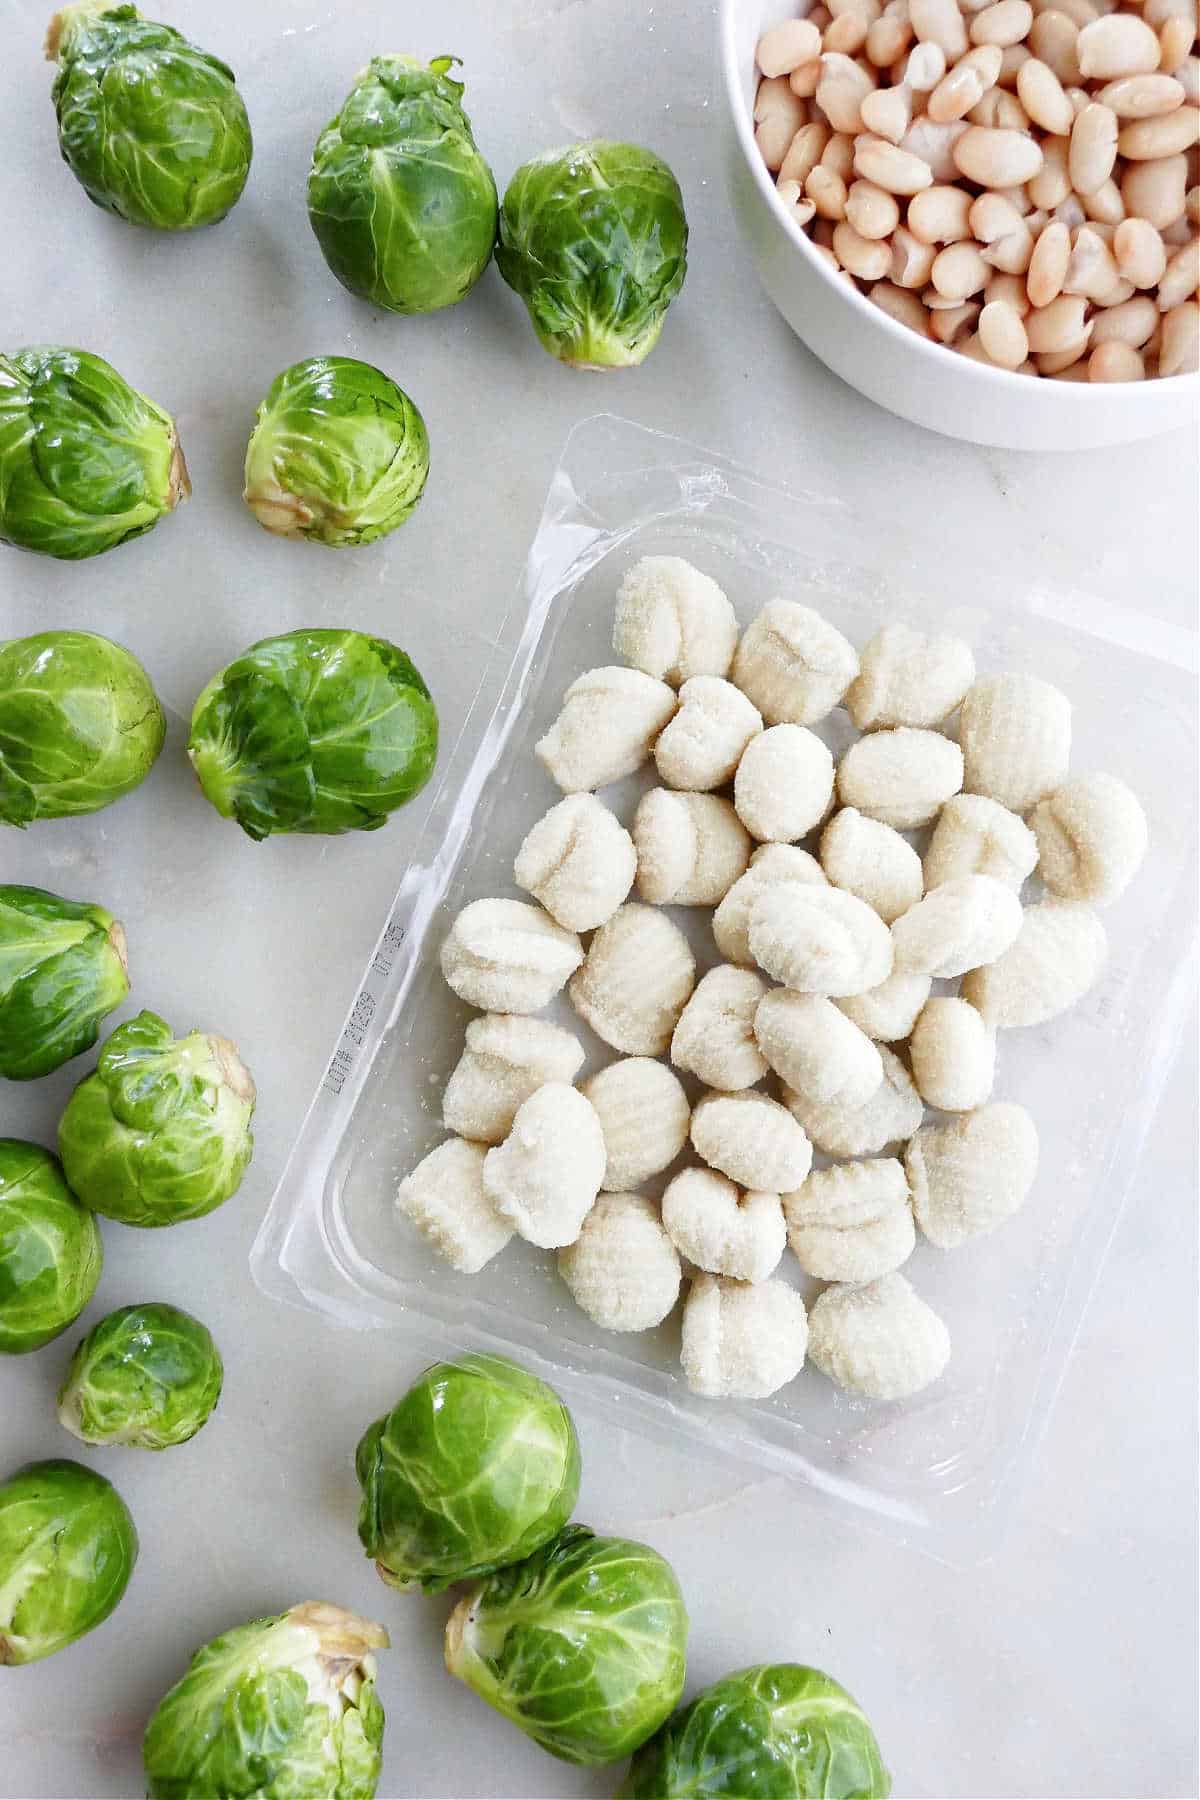 Brussels sprouts, gnocchi, and white beans spread out next to each other on a counter